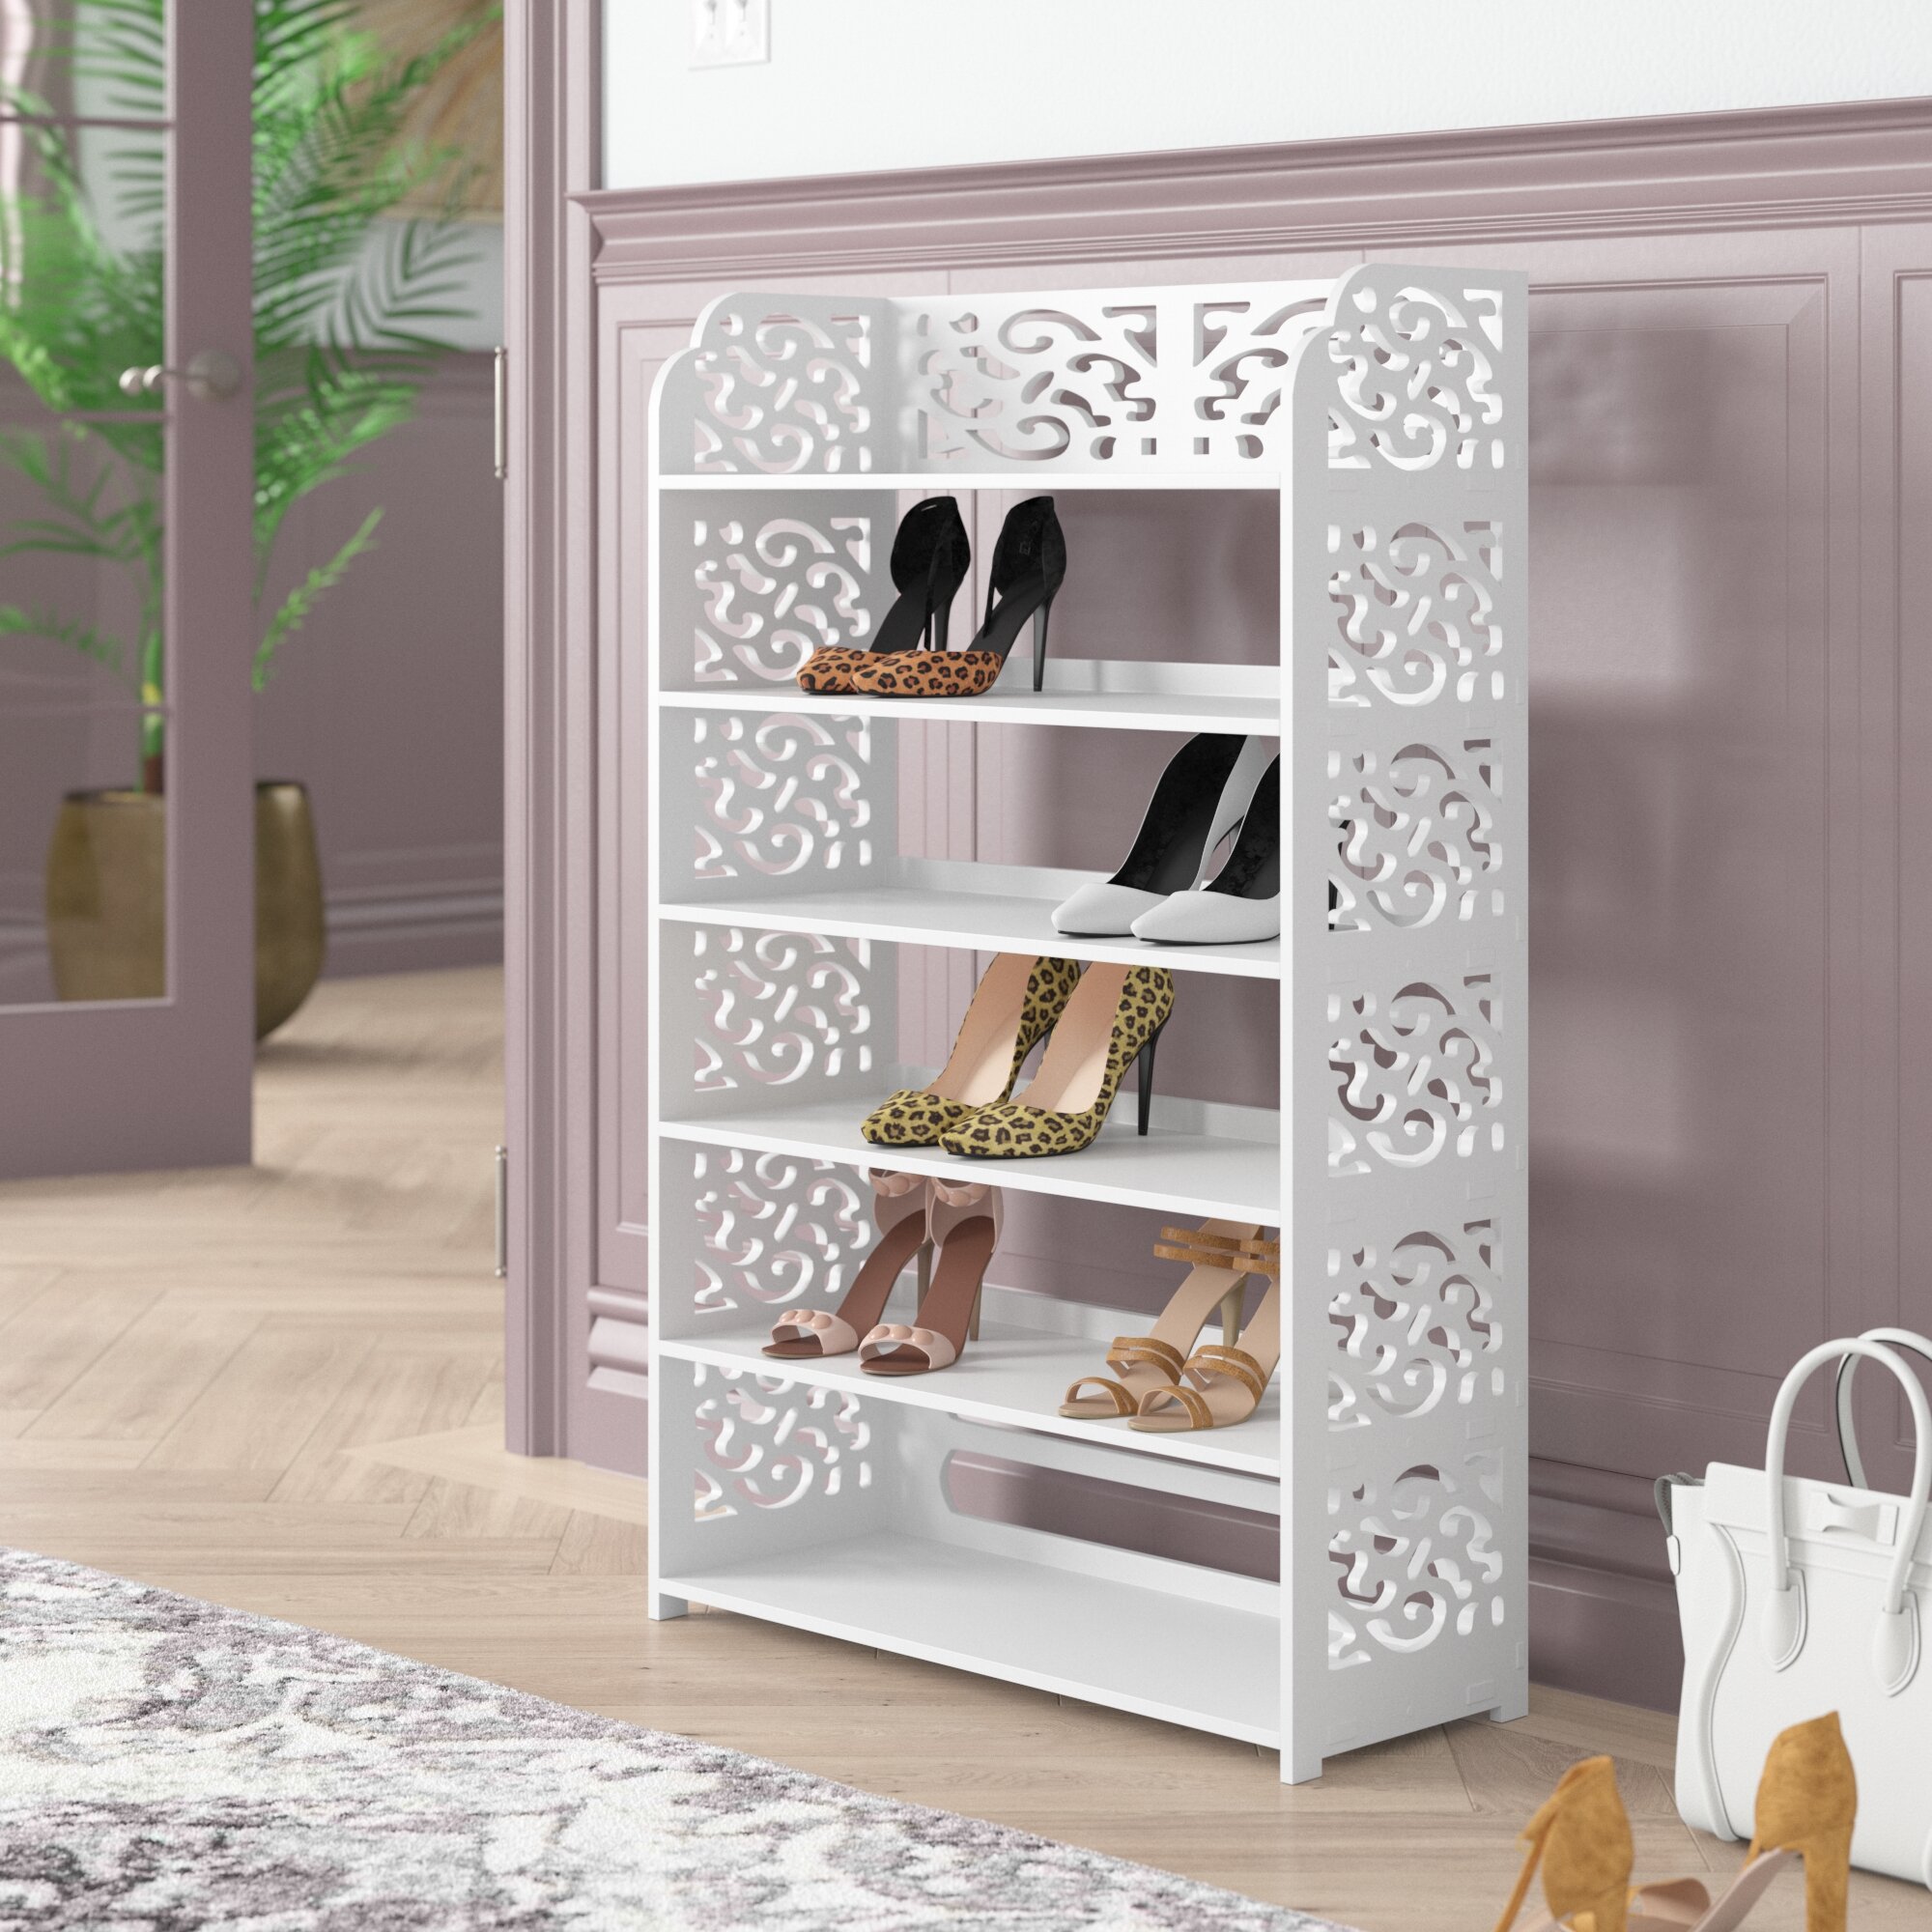 AirSafe Art Shipping Boxes and Shoe Storage